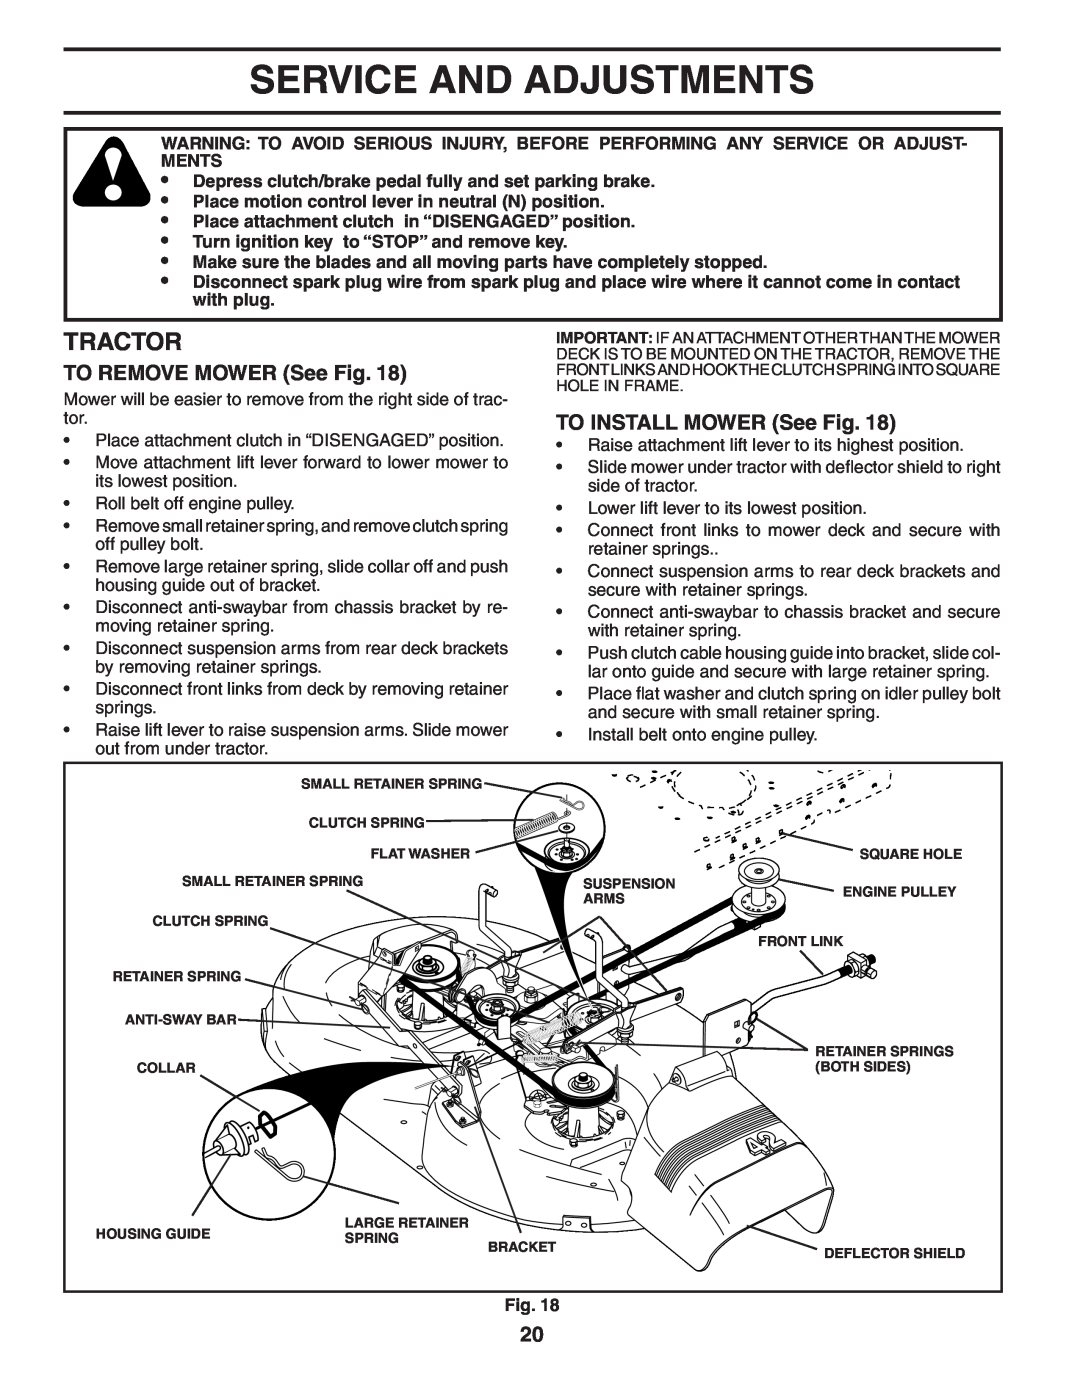 Poulan 184581 owner manual Service And Adjustments, TO REMOVE MOWER See Fig, TO INSTALL MOWER See Fig, Tractor 